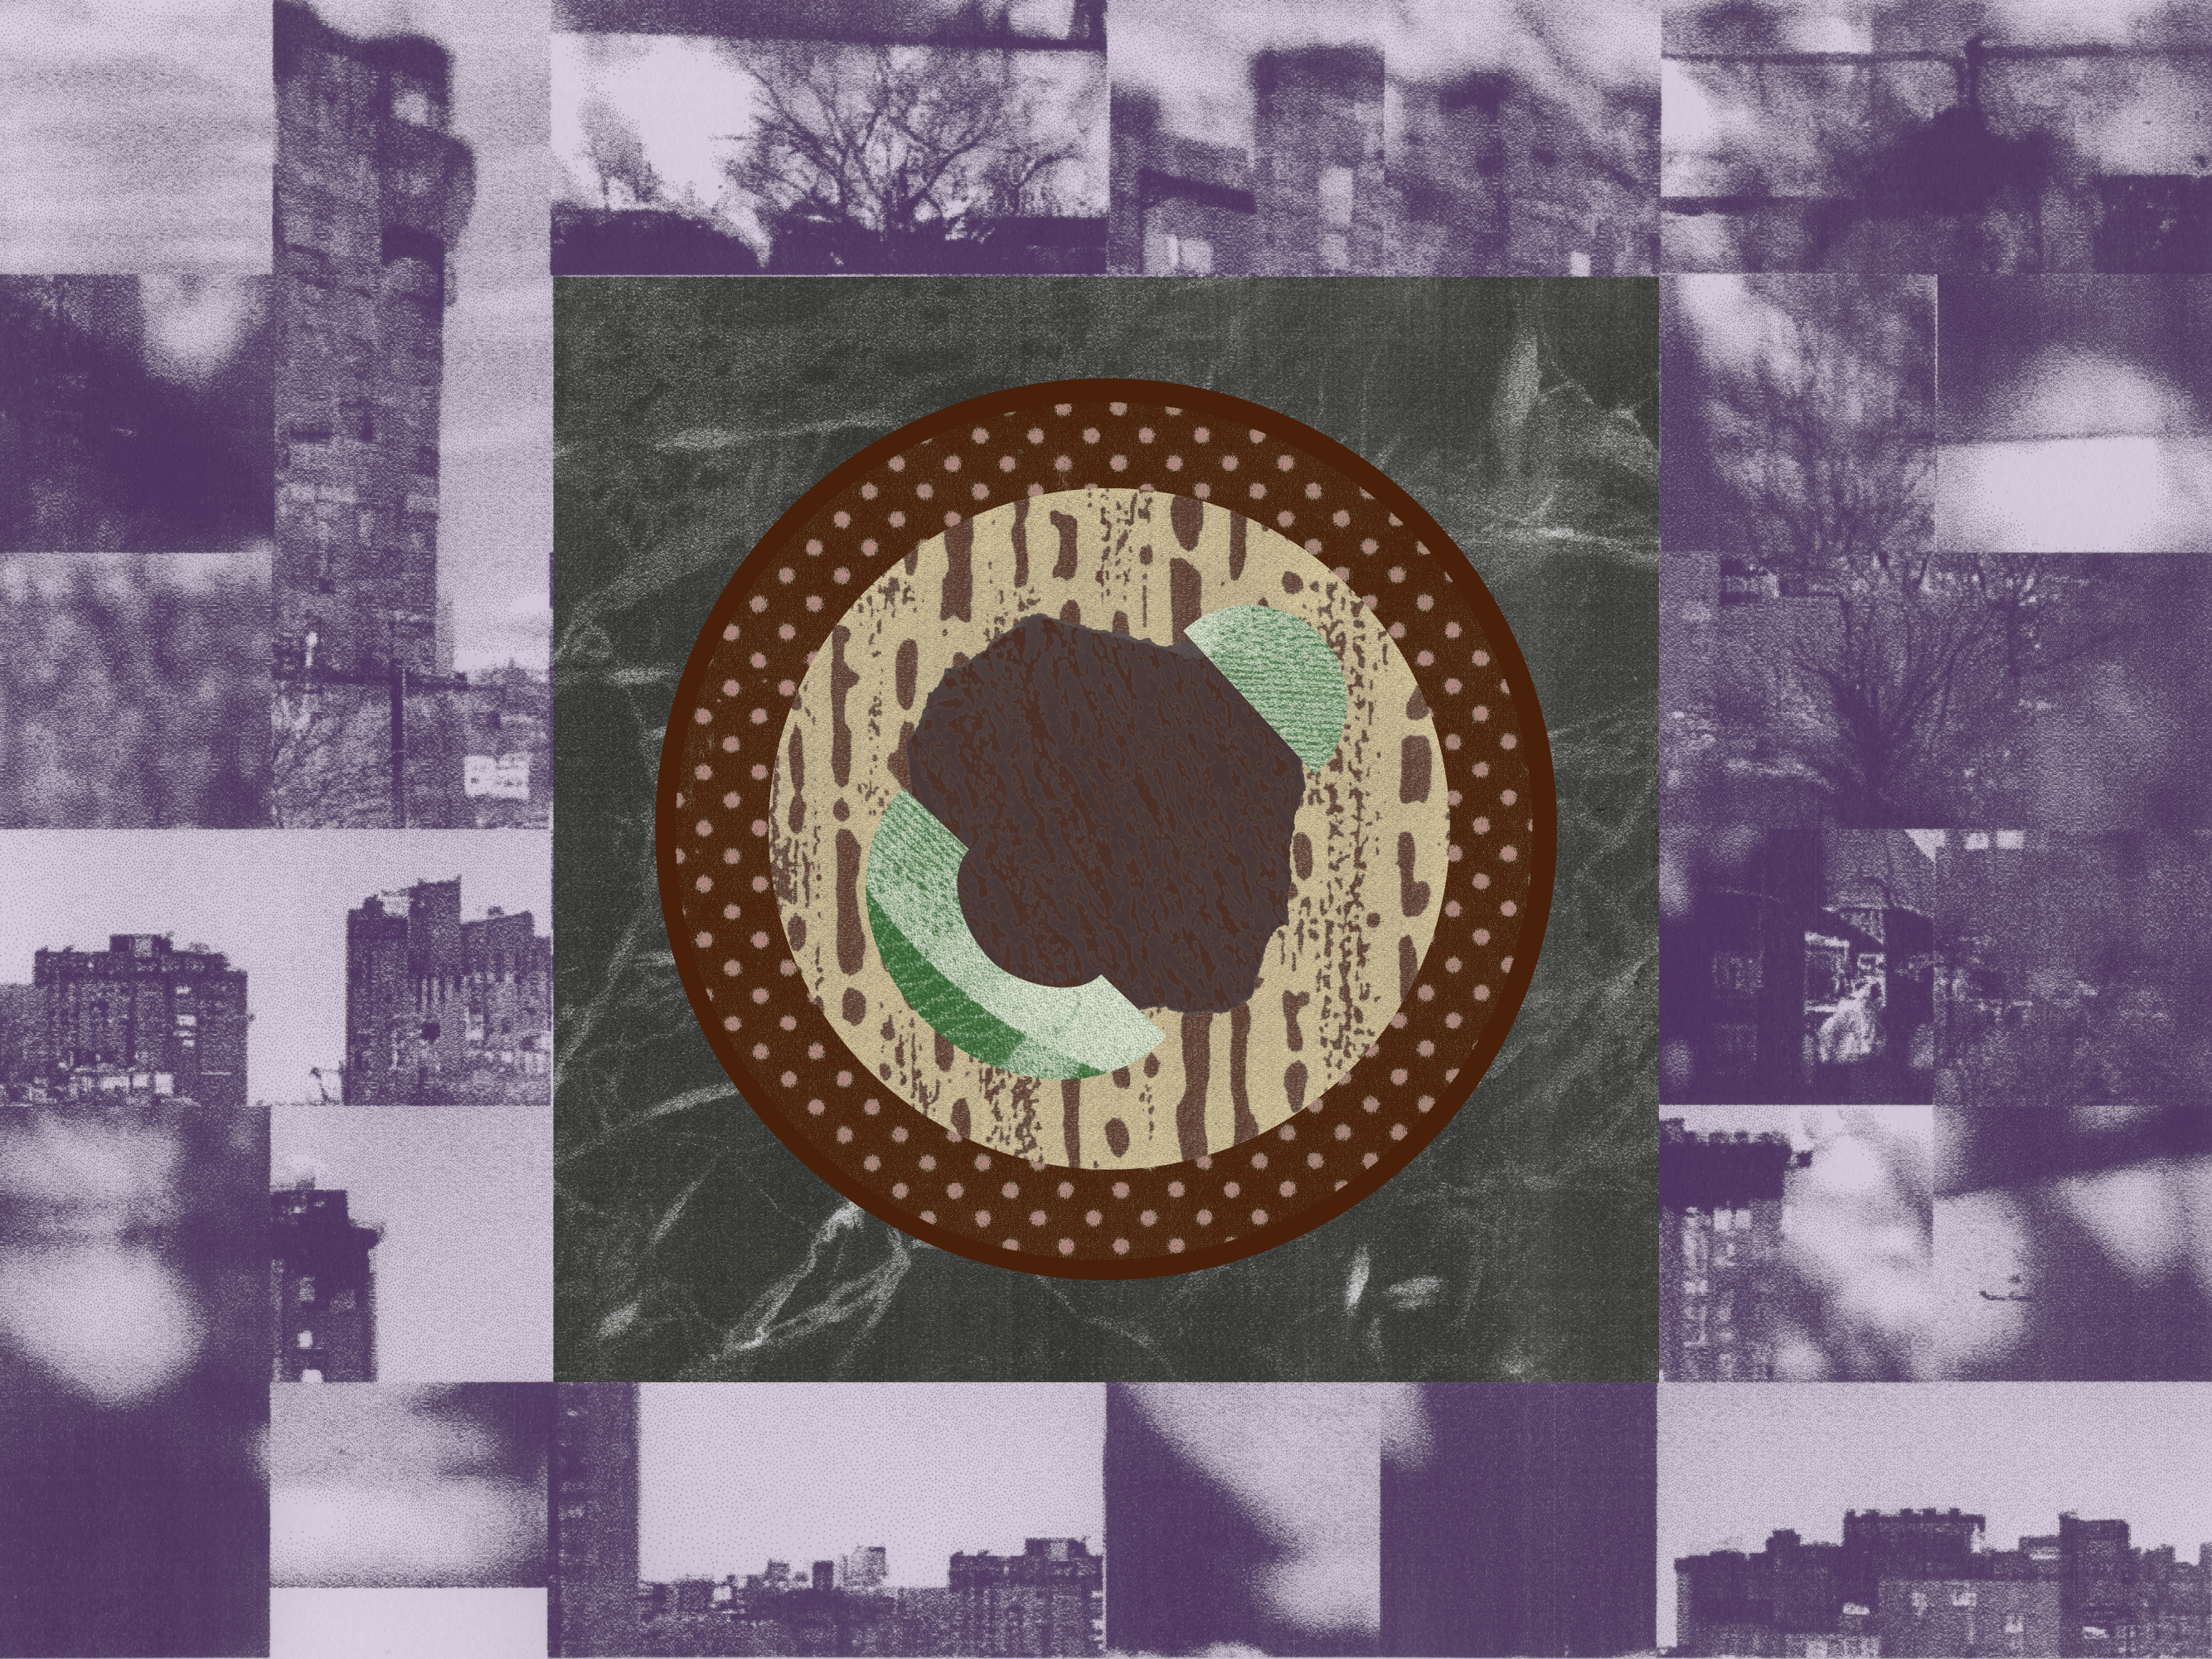 Abstract round plate of food in browns and greens overlaying a grid of black-and-white cityscapes.